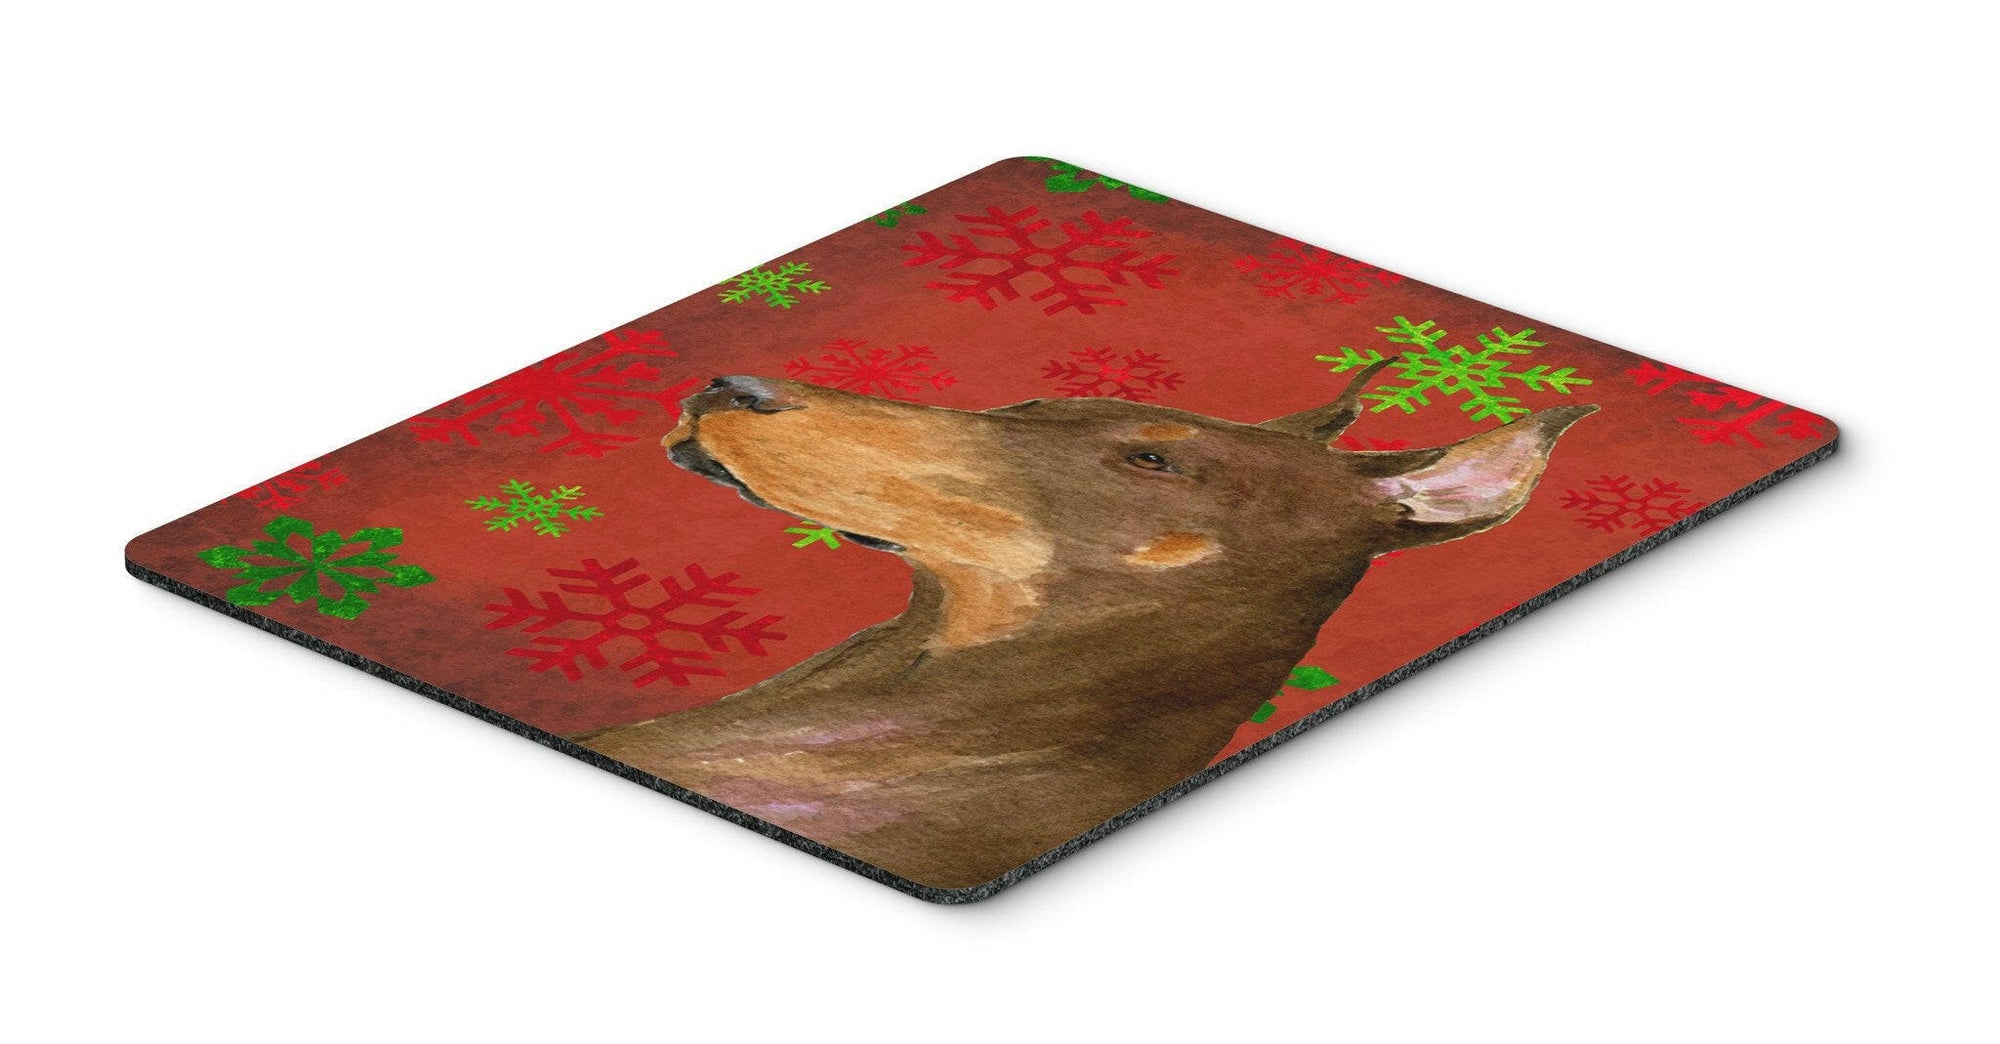 Doberman Red and Green Snowflakes Christmas Mouse Pad, Hot Pad or Trivet by Caroline's Treasures